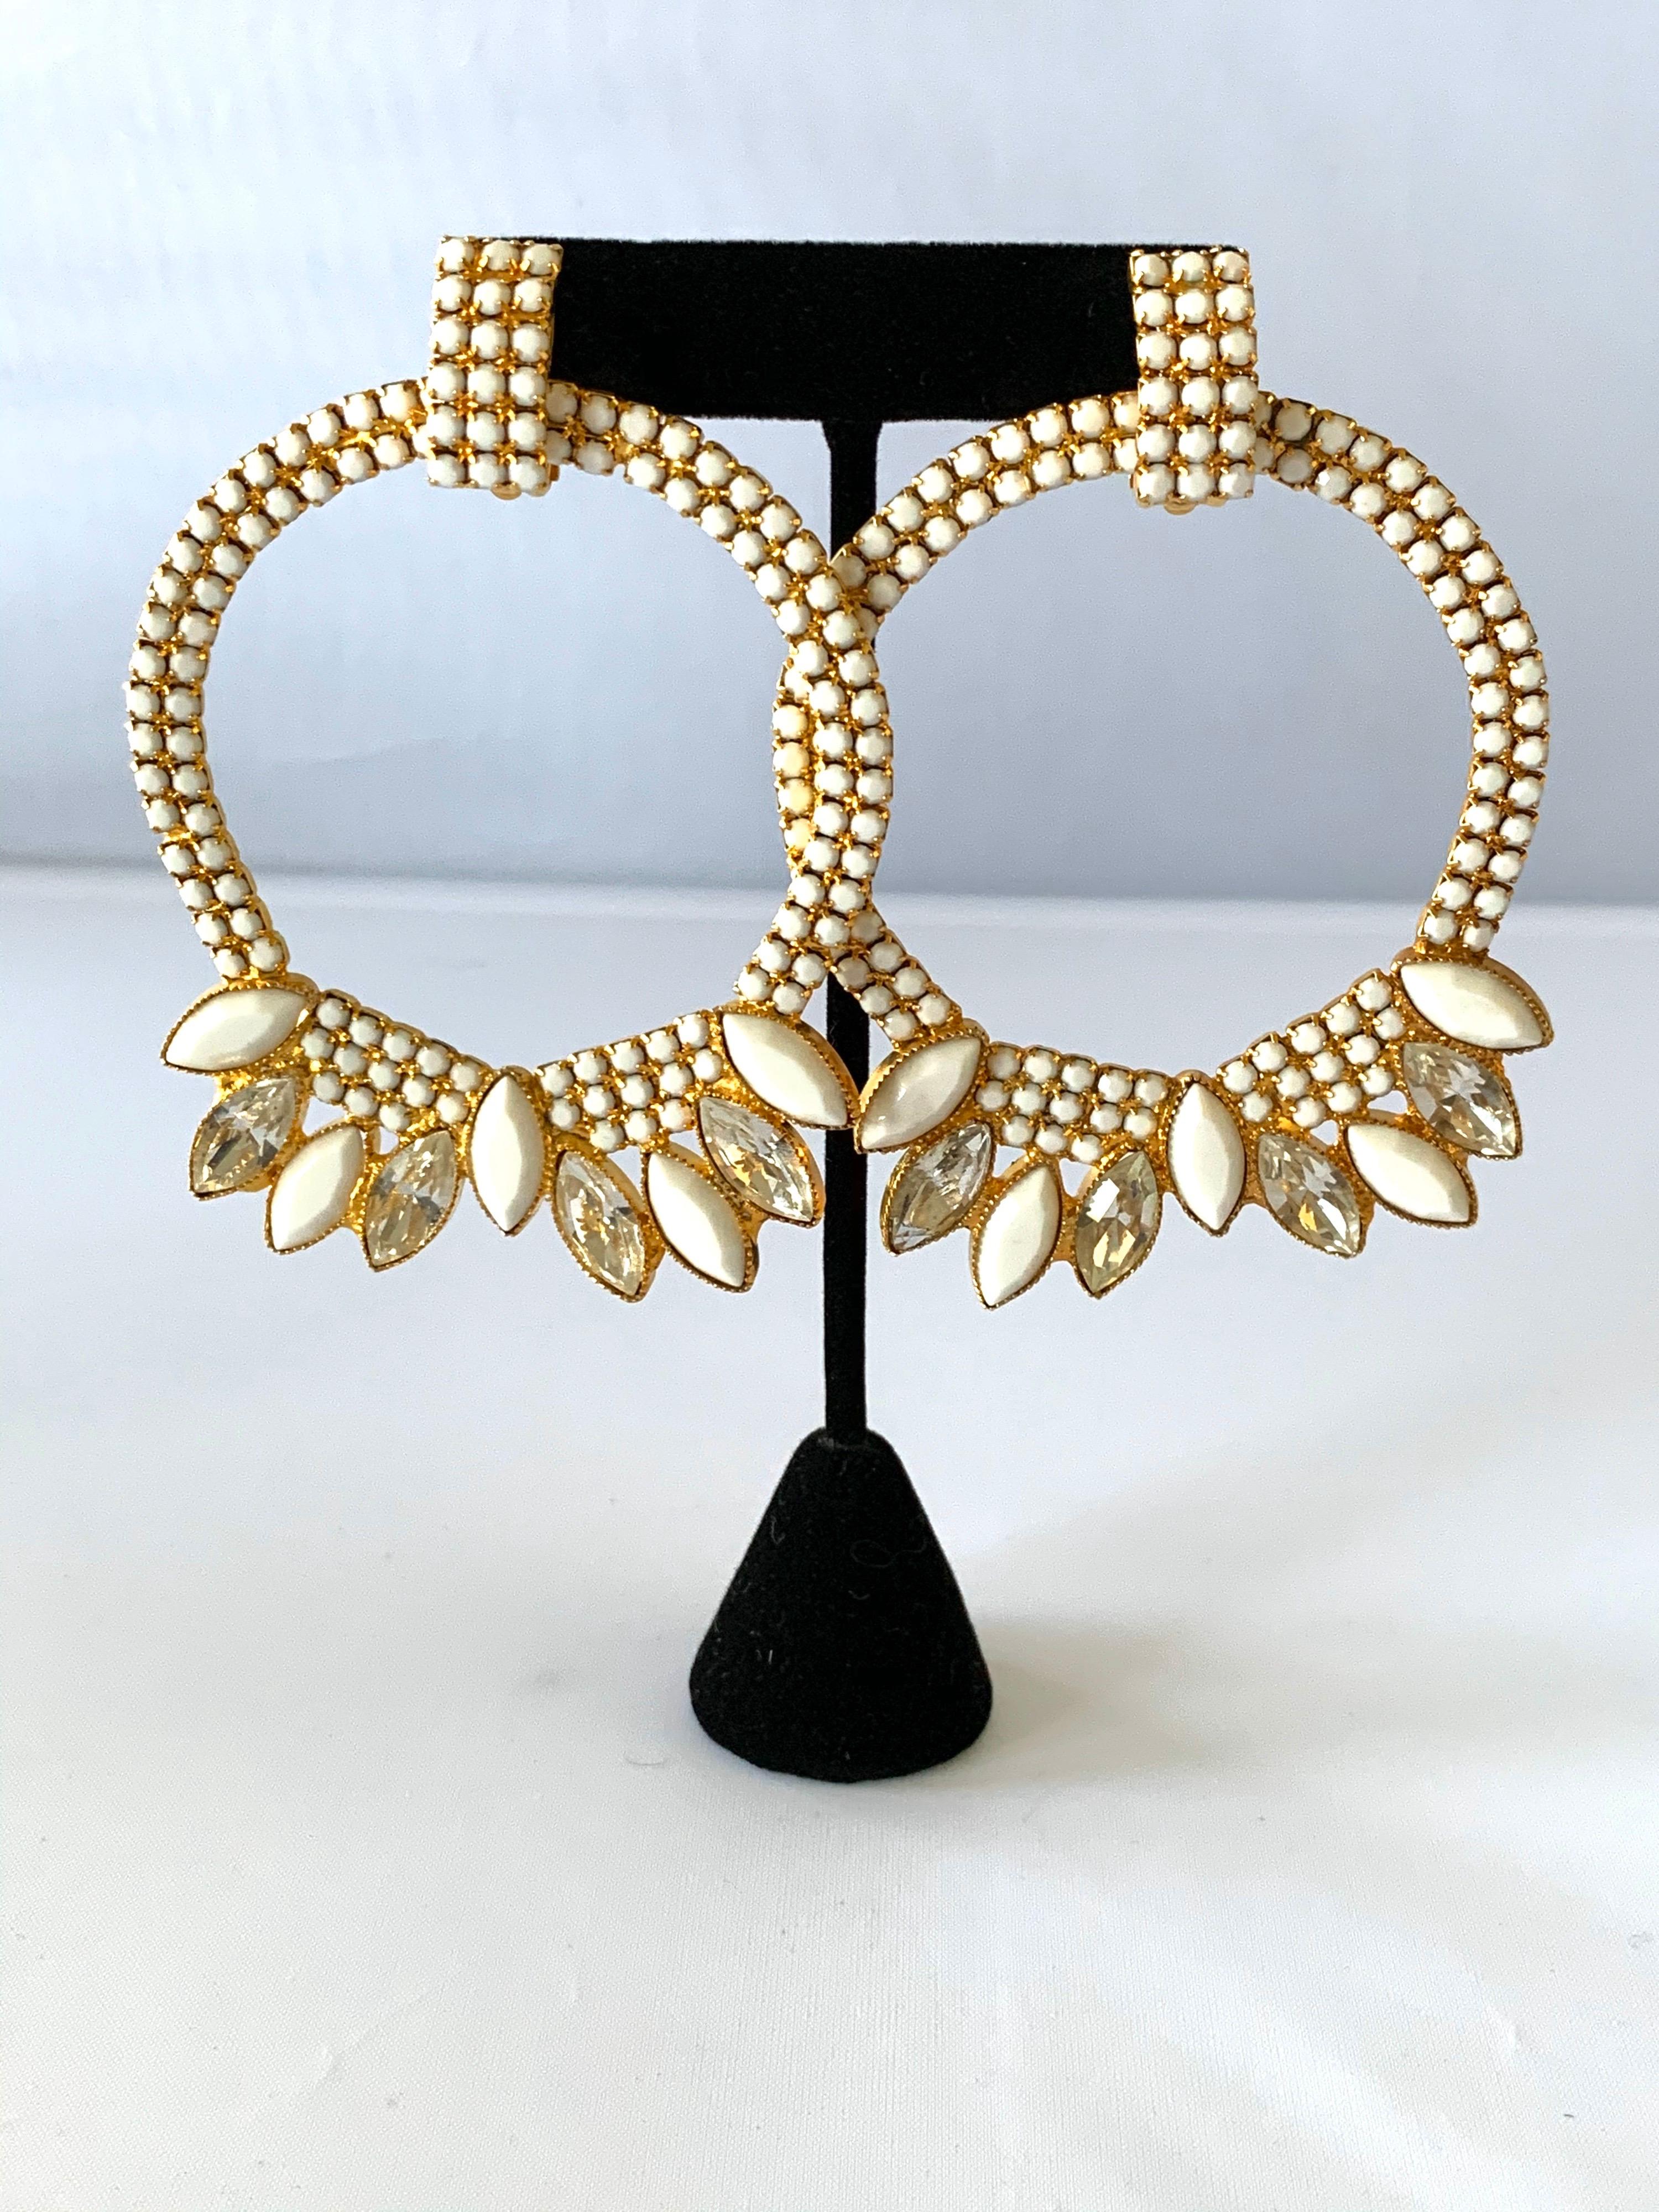 Large vintage hoop statement clip-on earrings - comprised out of gilt metal in an architectural manner the earrings are adorned by German white glass rhinestones and accented by large clear Swarovski rhinestone navettes. Designed by William de Lillo